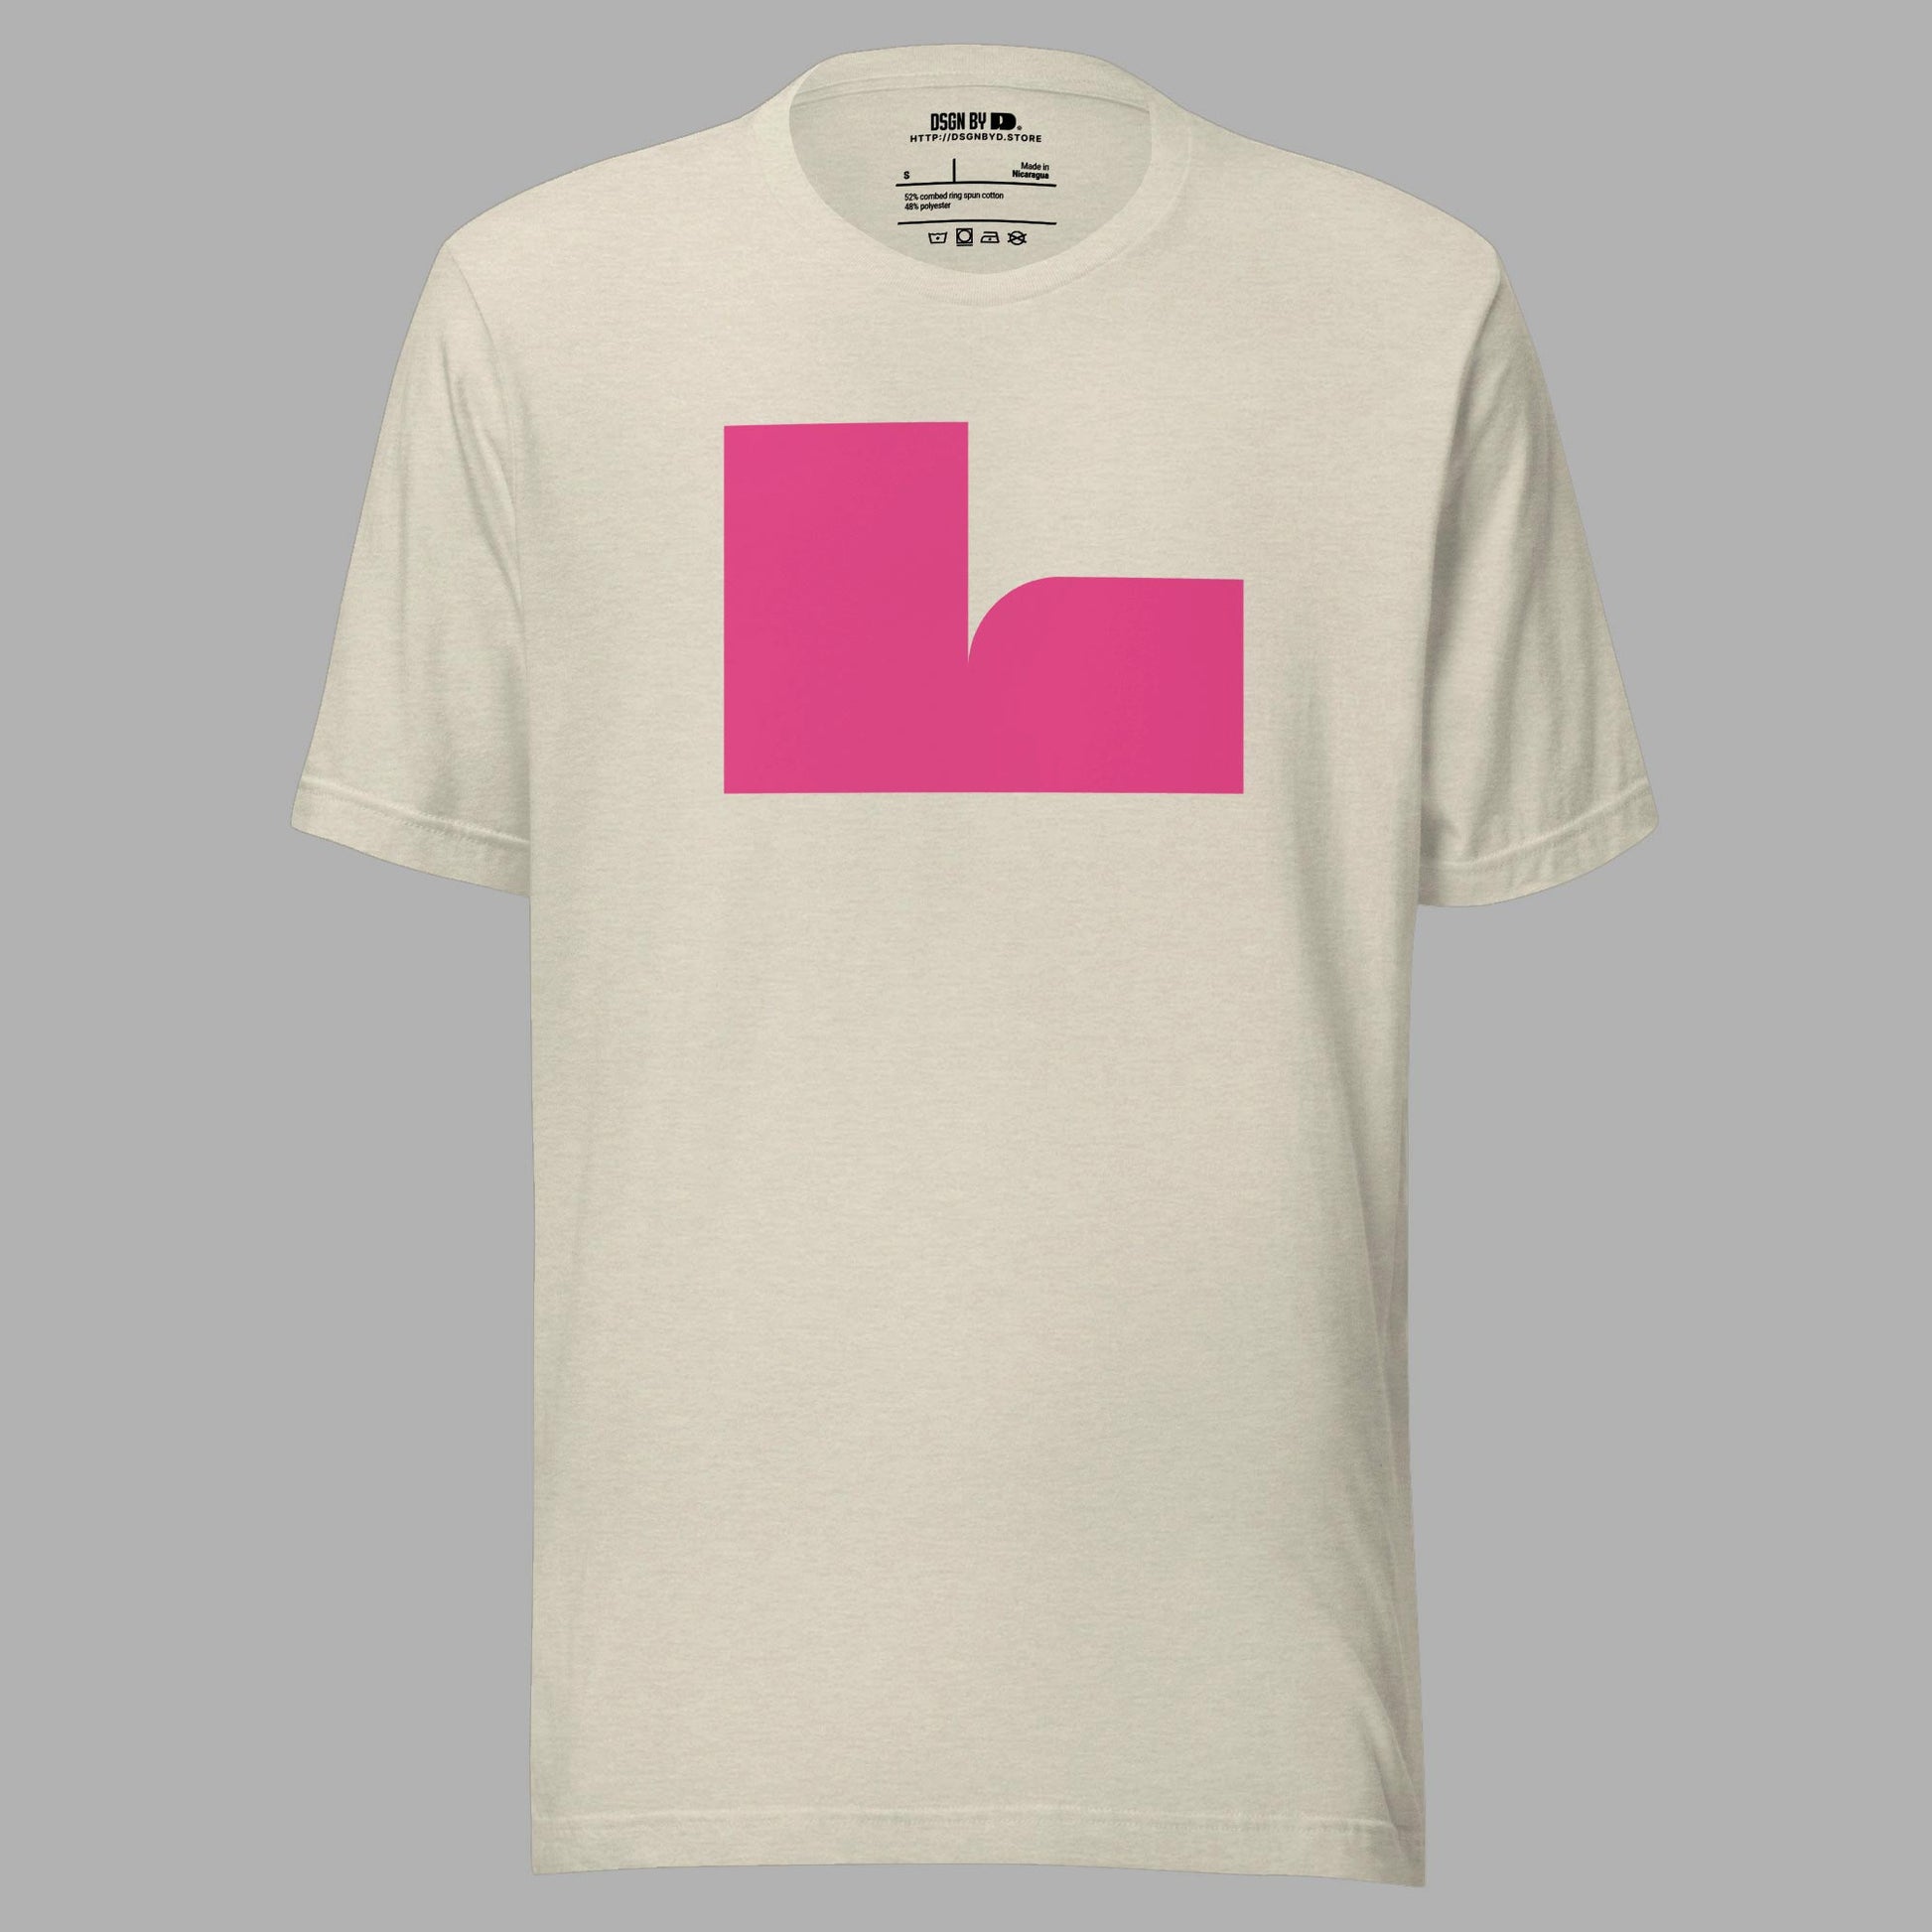 A beige cotton unisex graphic tee with letter L.